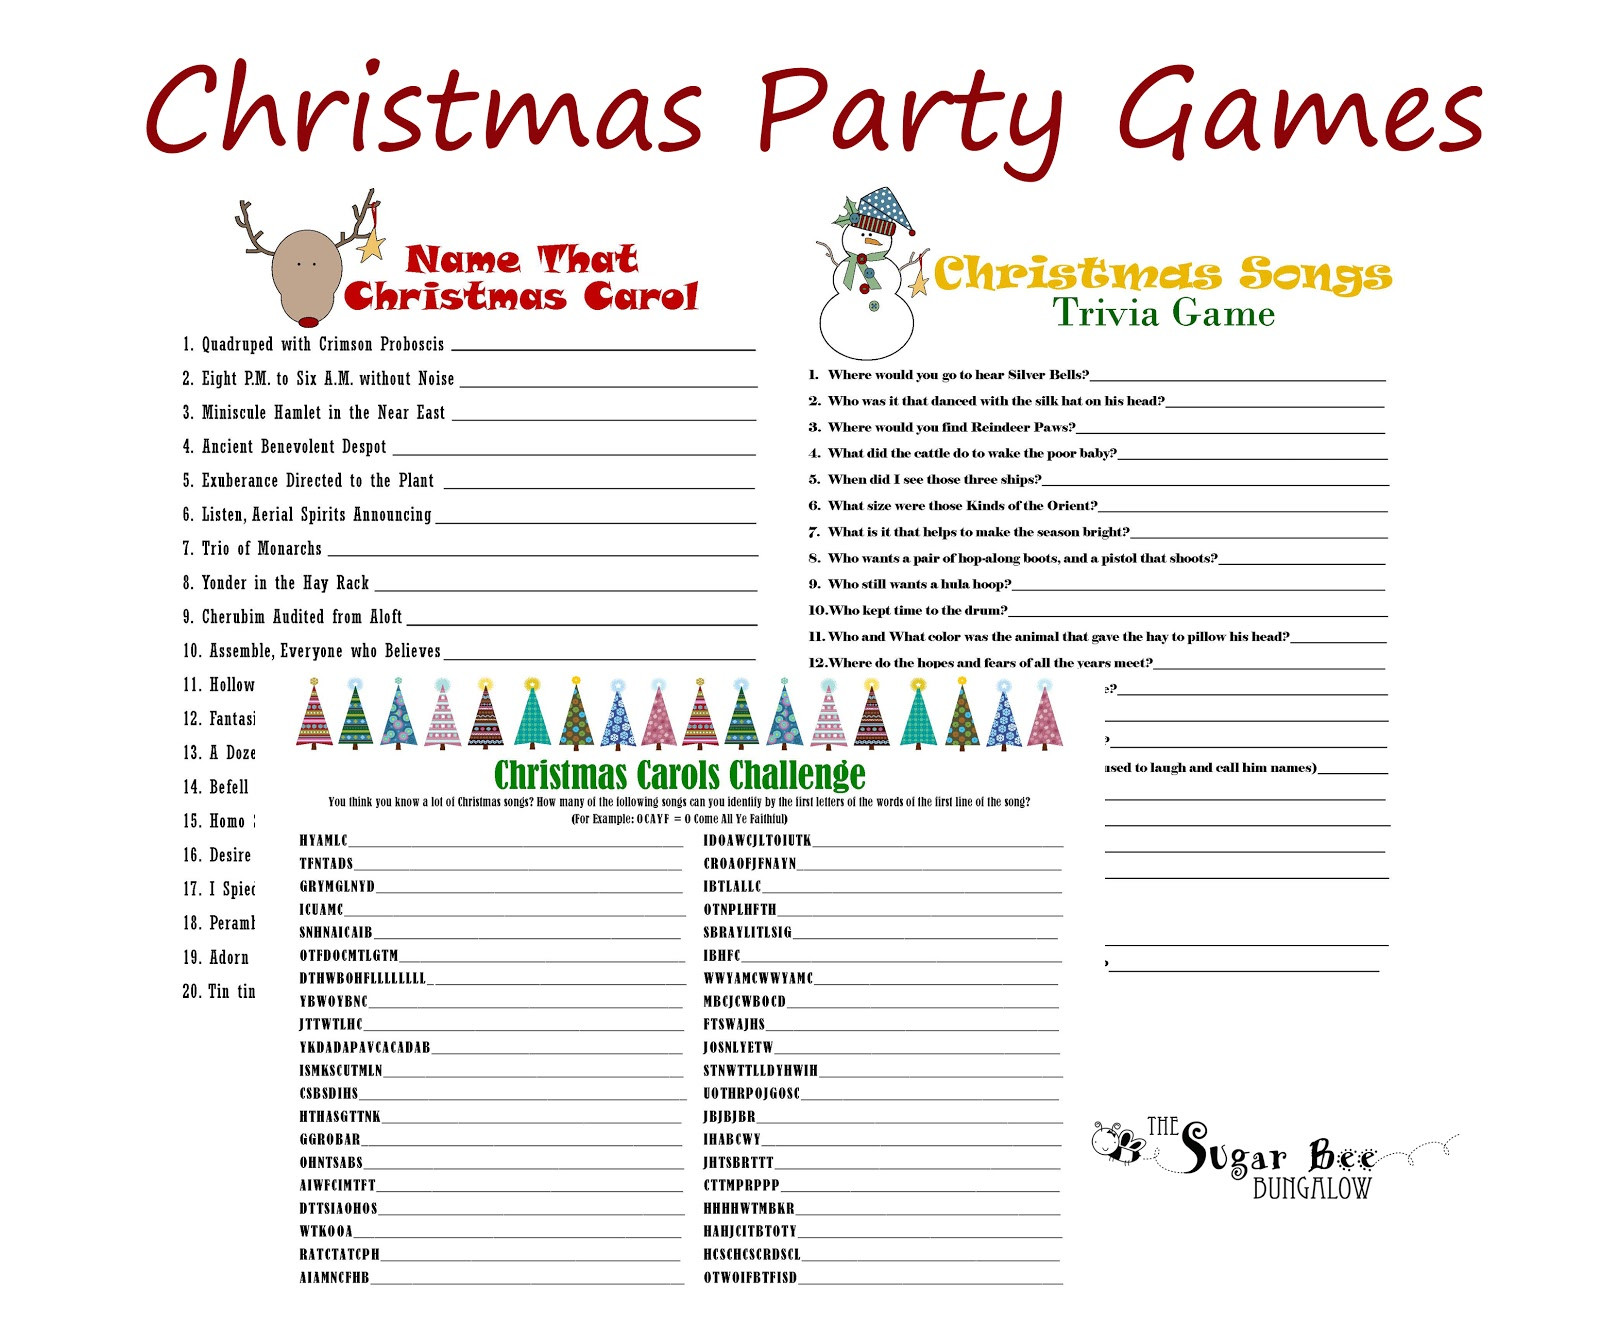 Enjoyable Office Christmas Party Games Ideas
 The Sugar Bee Bungalow December 2012